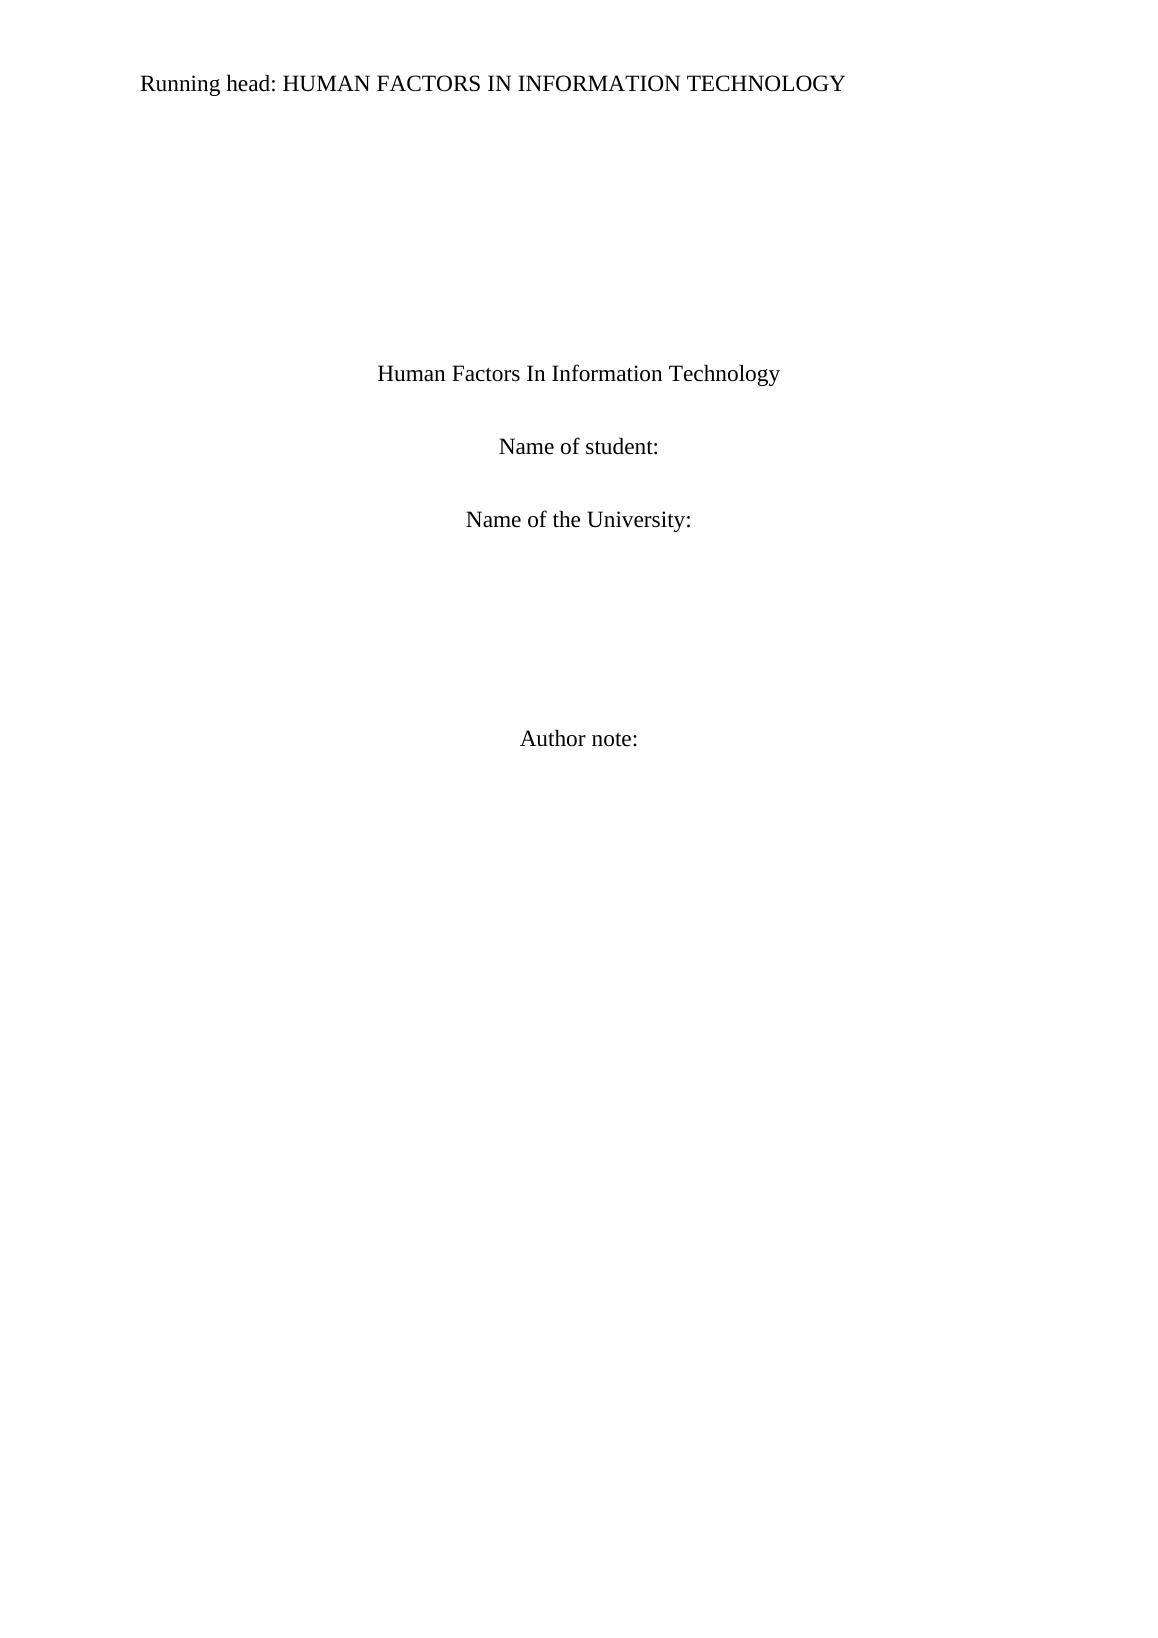 Human Factors in Information Technology Assignment_1